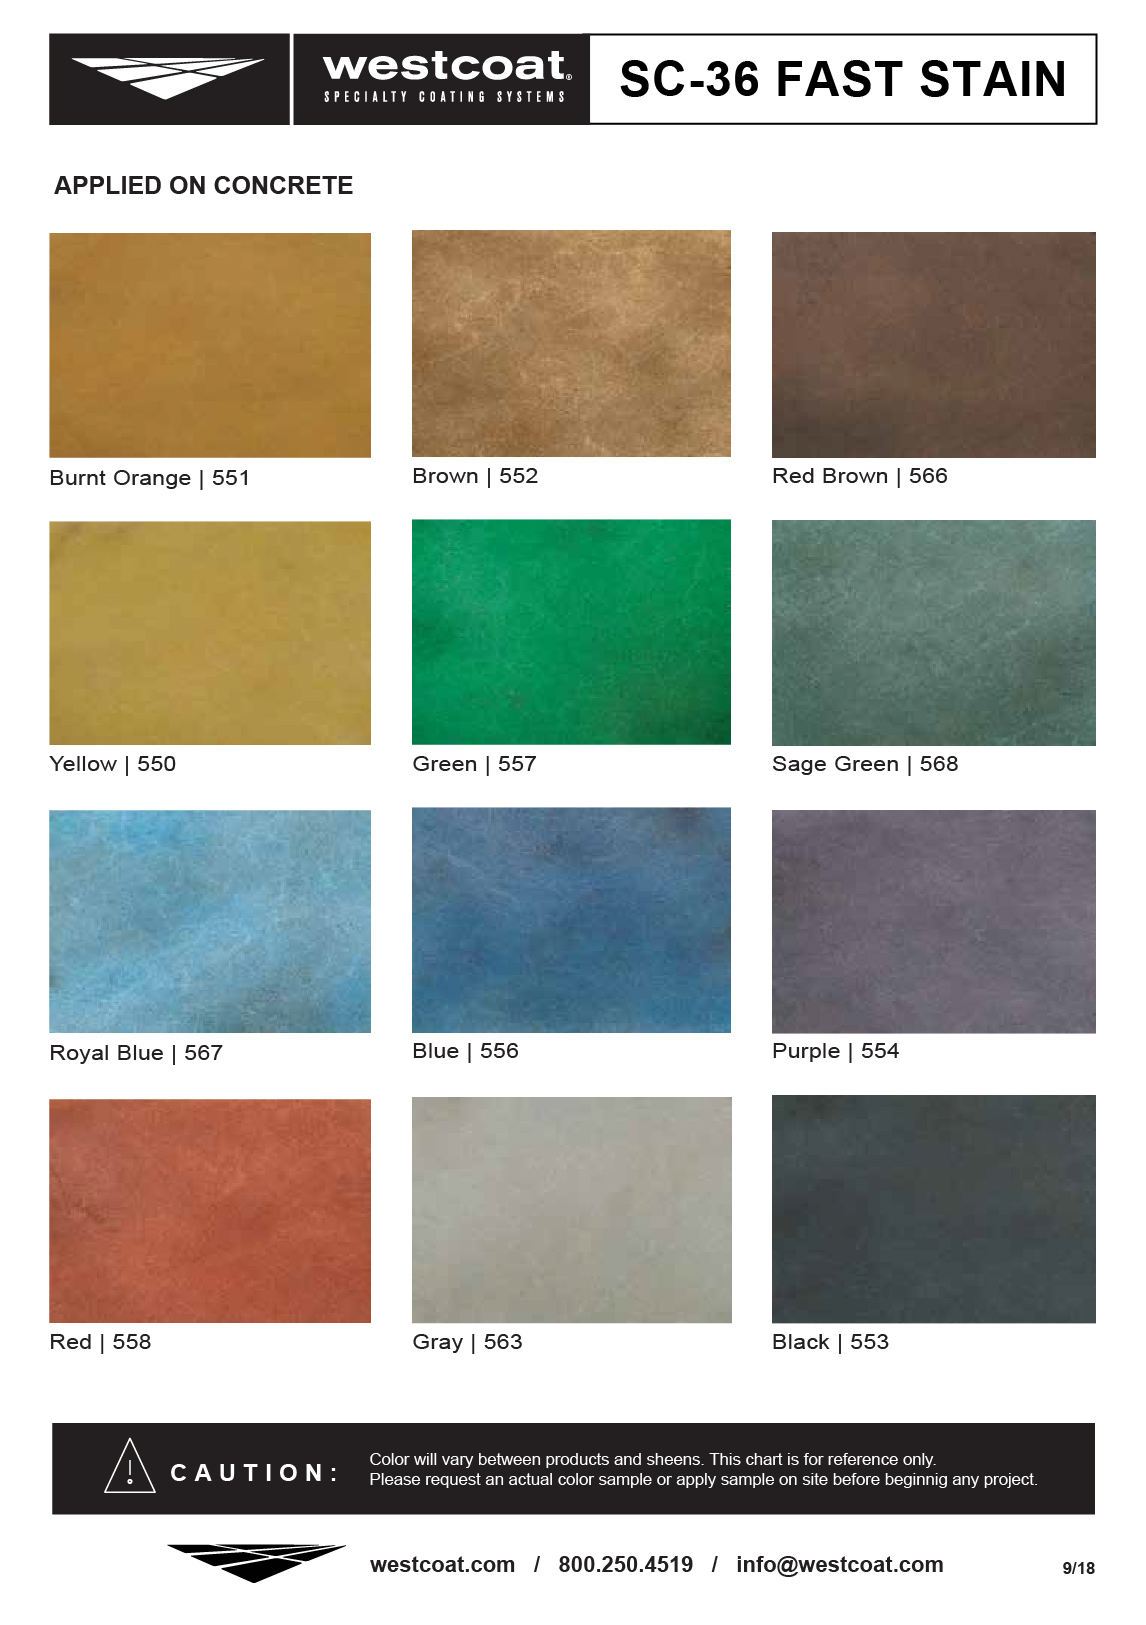 New CA-36 Color Packs - Westcoat Specialty Coating Systems